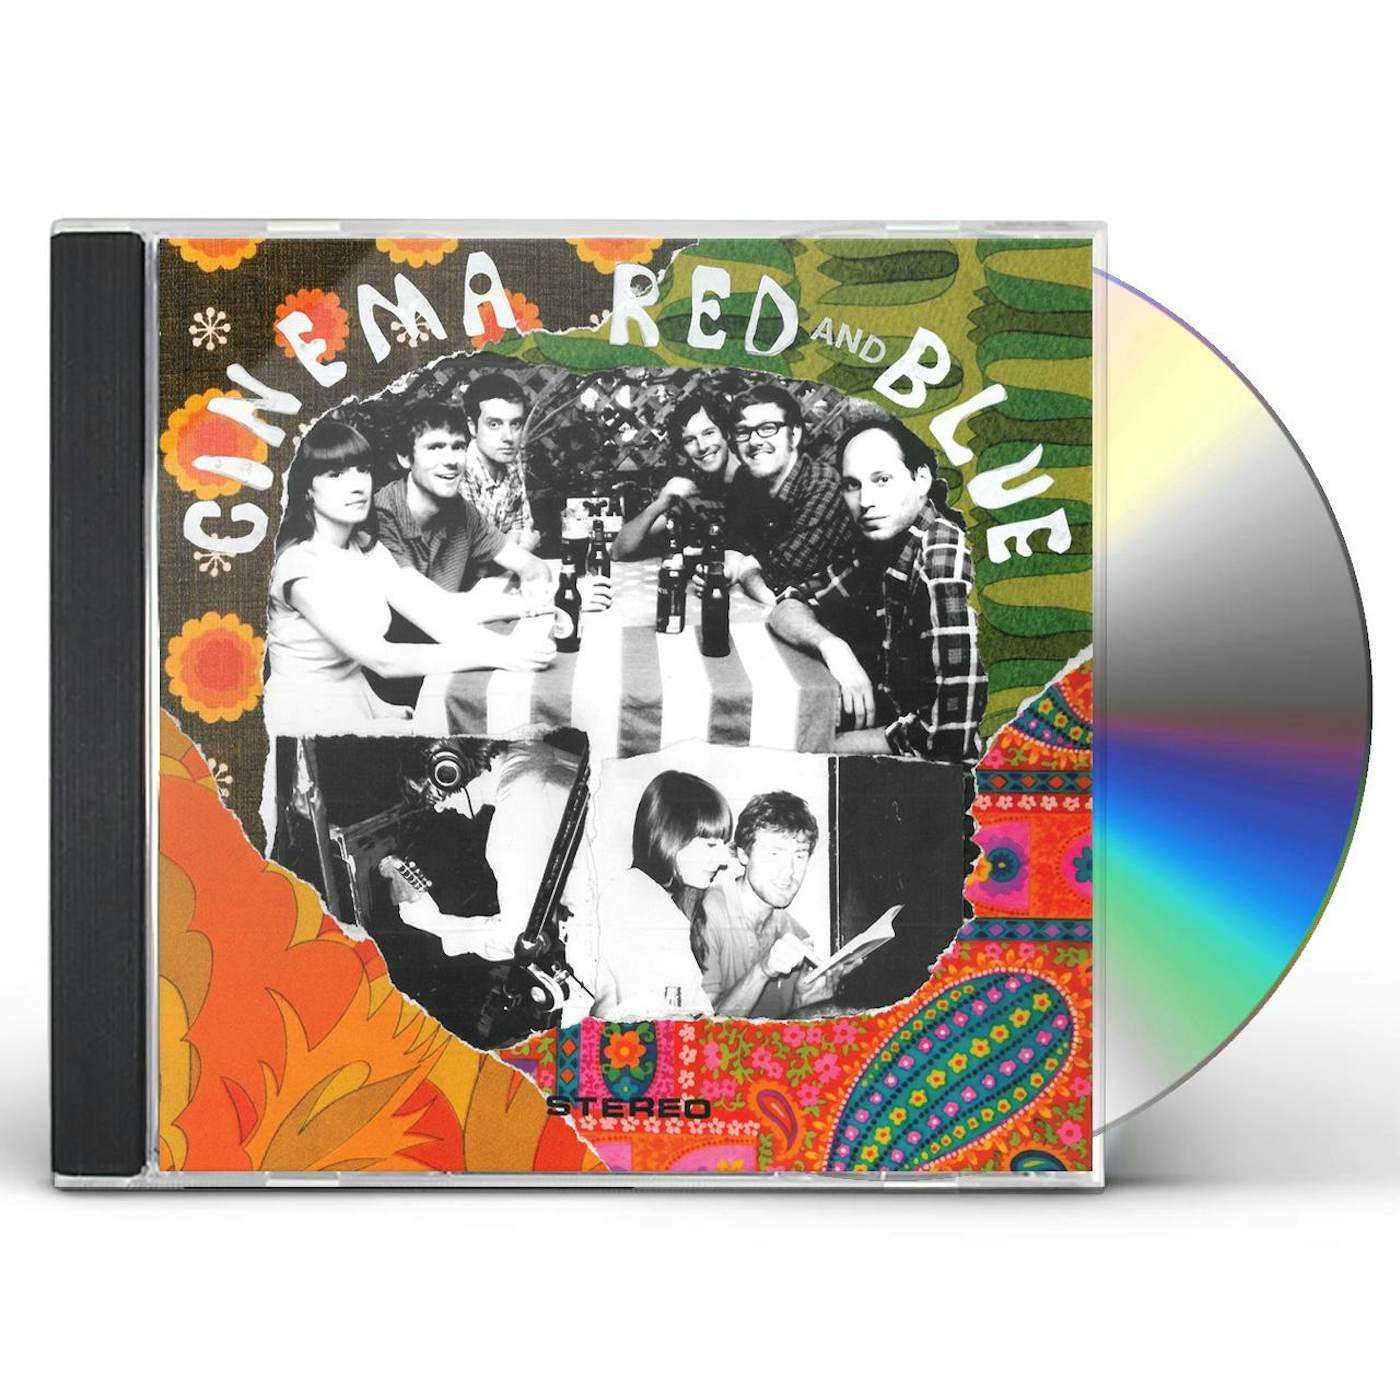 Cinema Red And Blue CD